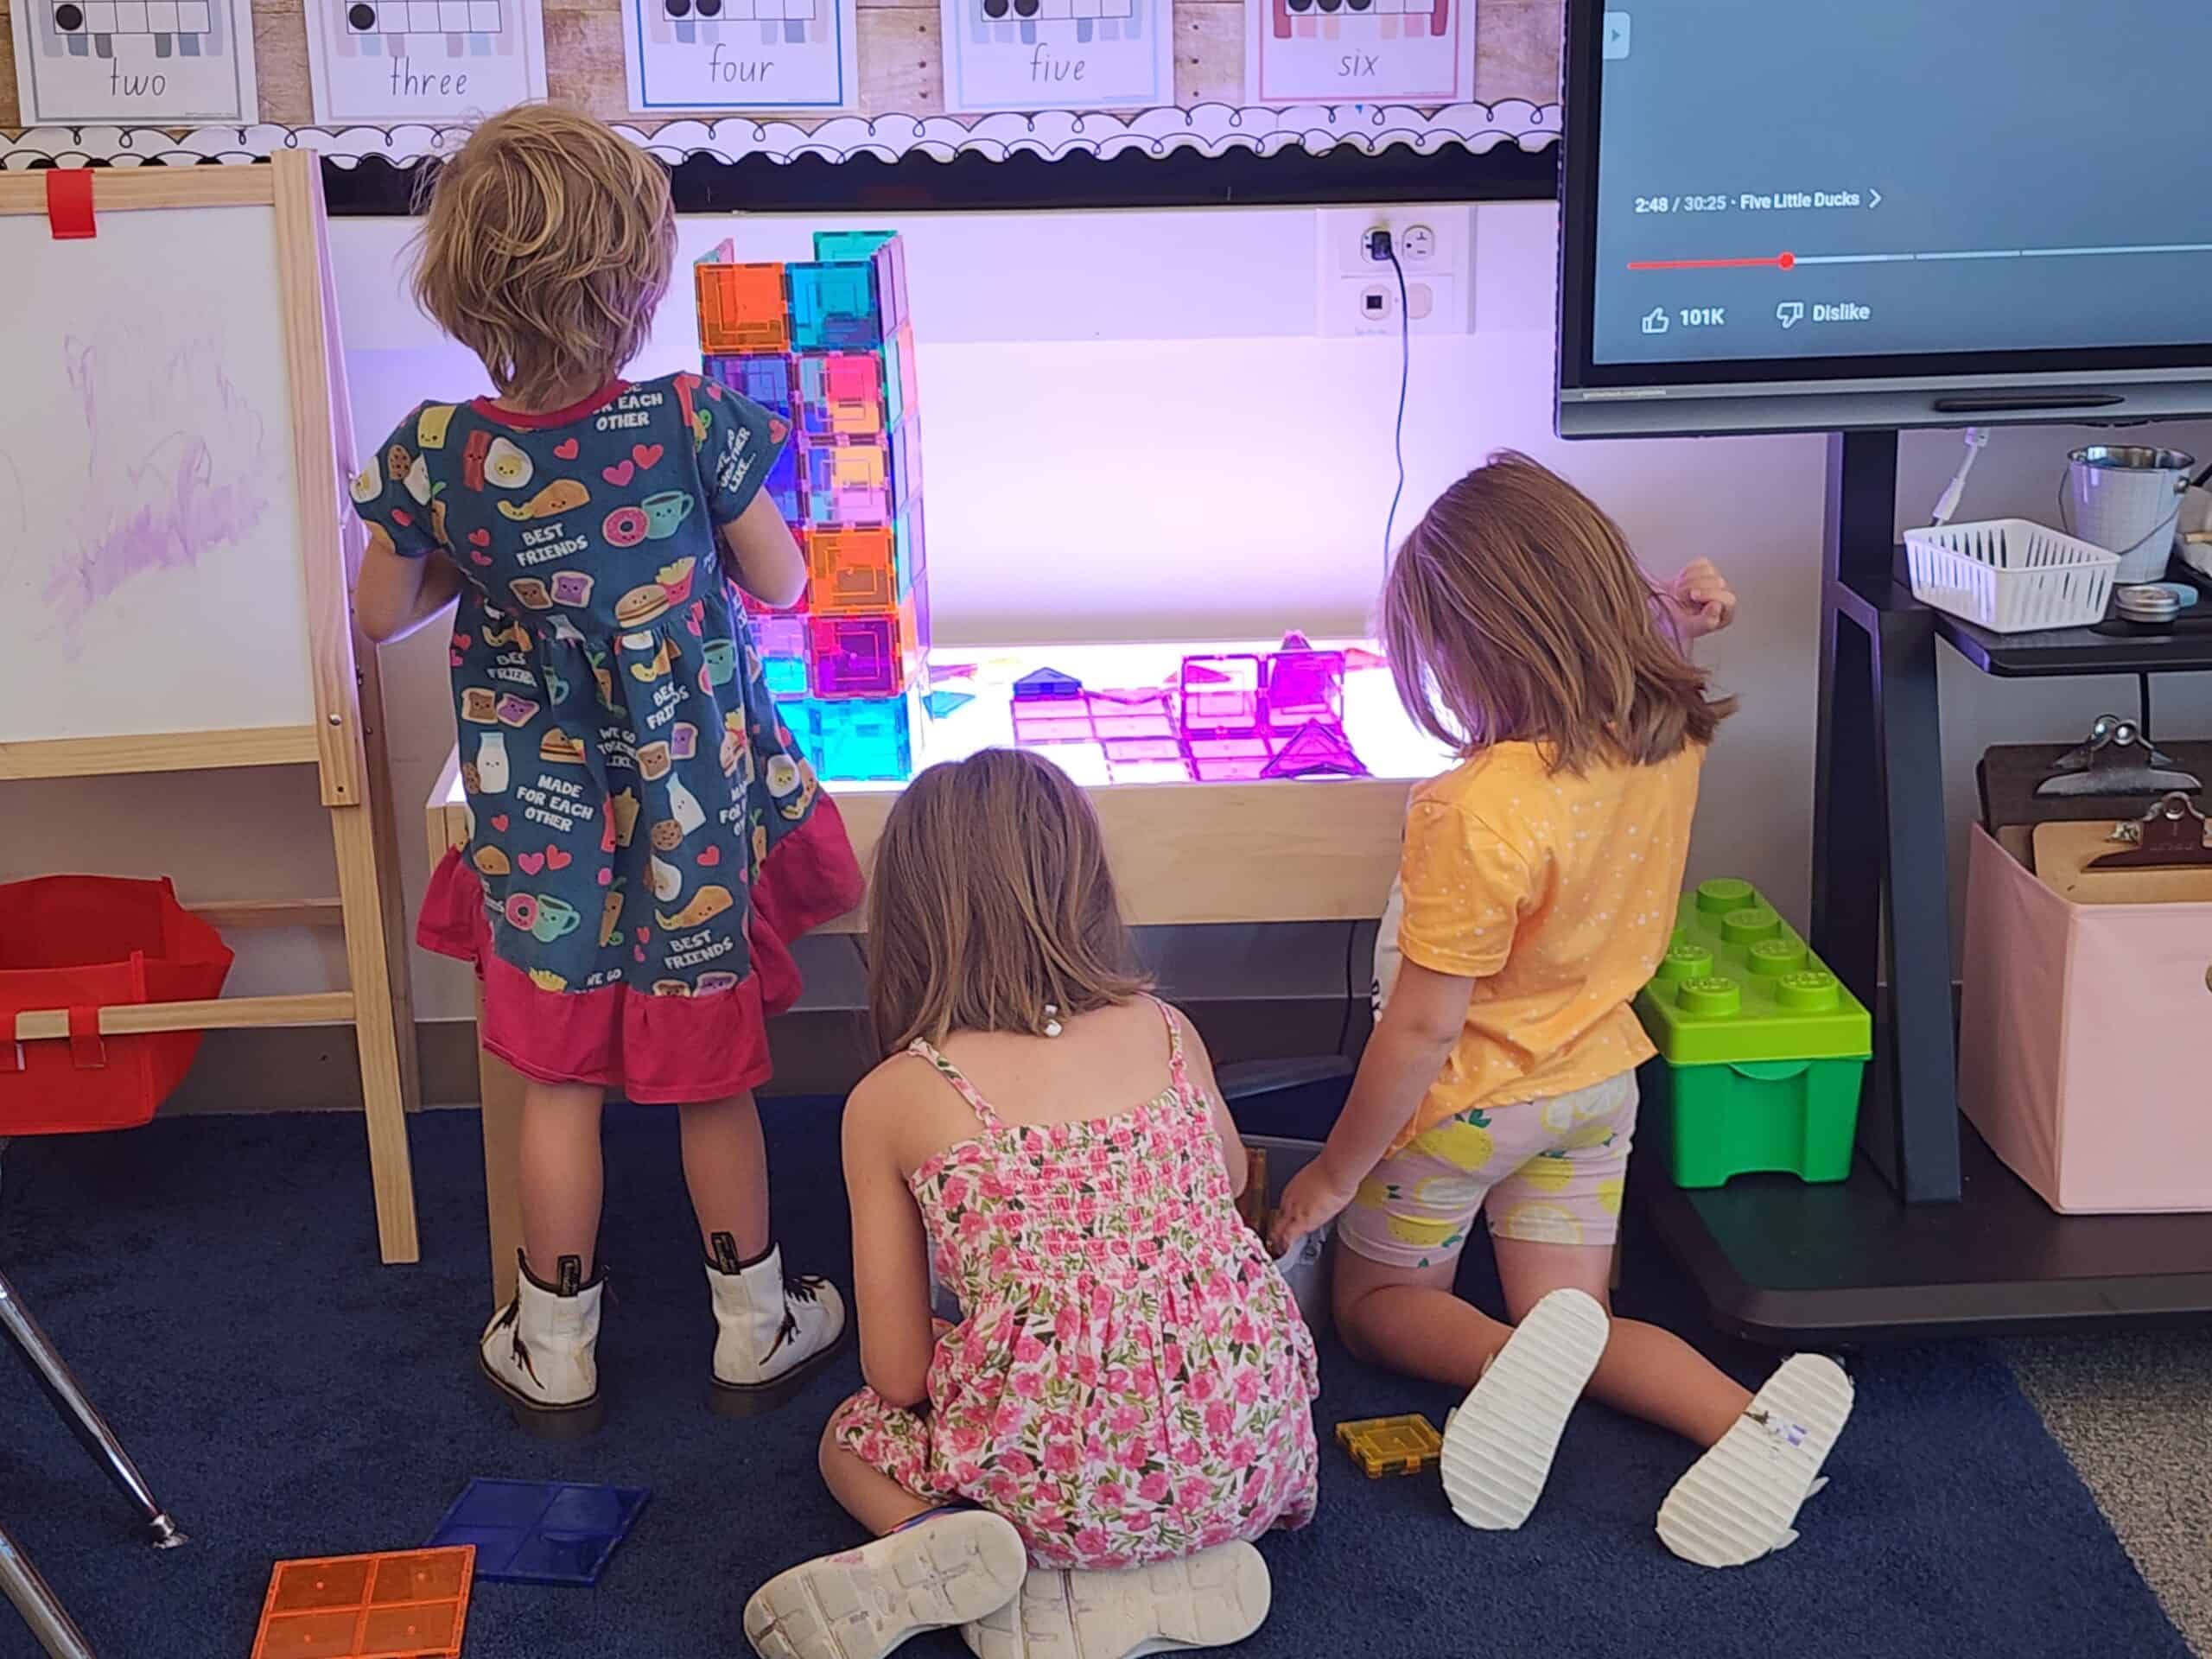 Three kids gather next to a light table during free play time.